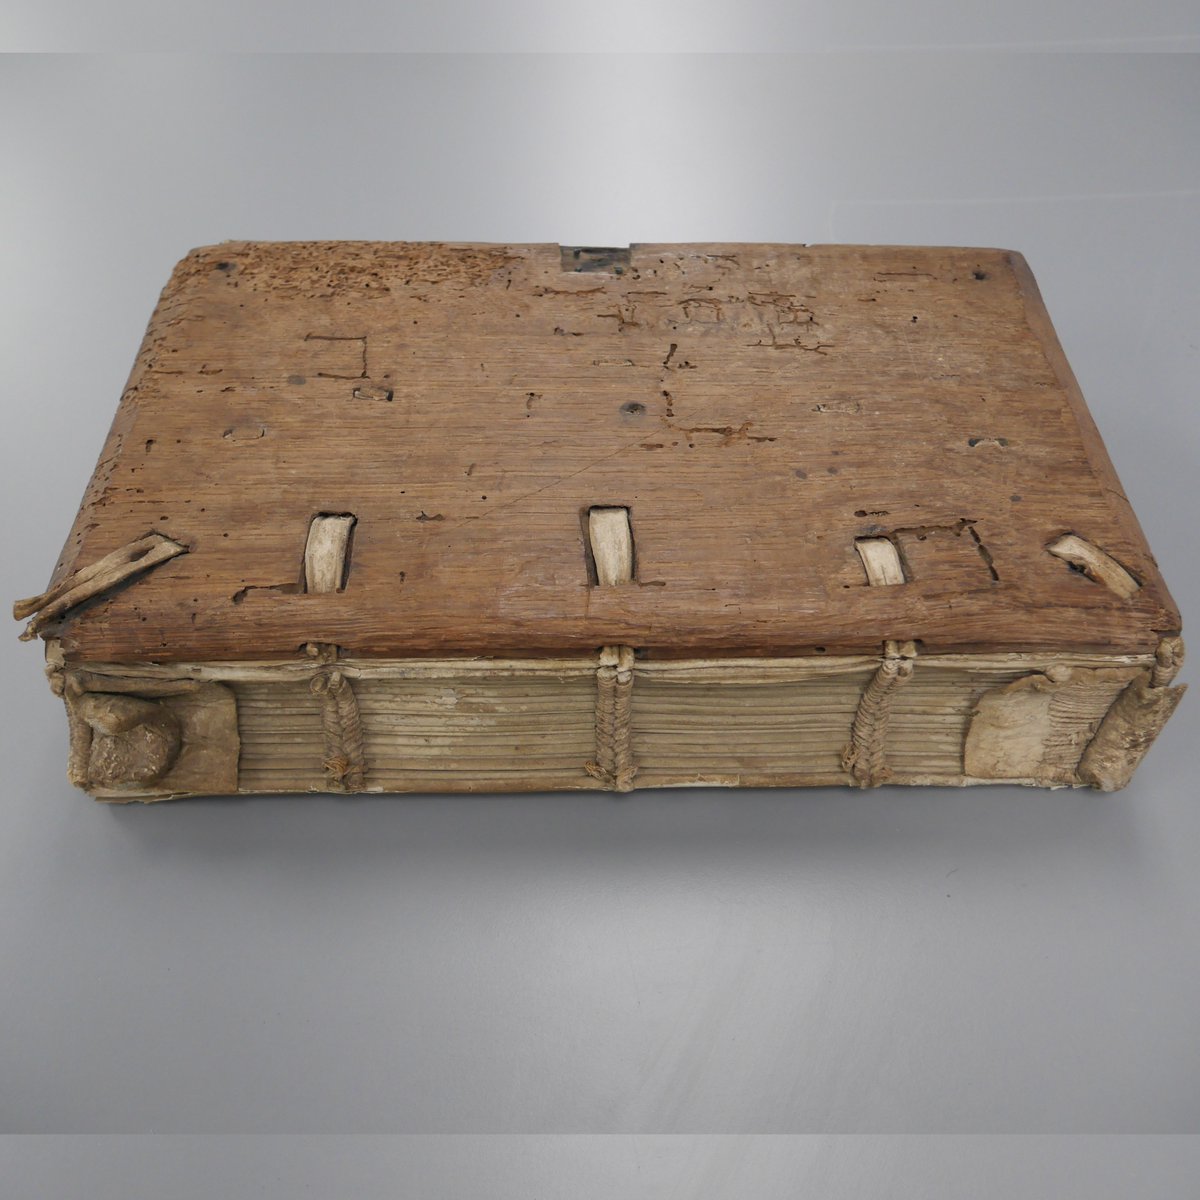 This week, the #CULconservation team have chosen their top 10 manuscripts from the the #CuriousCures Project. Today we have a Cistercian manuscript with an exposed medieval binding structure [CUL MS Add. 5368]. 

cudl.lib.cam.ac.uk/view/MS-II-000…

#bookconservation #medievalmanuscripts